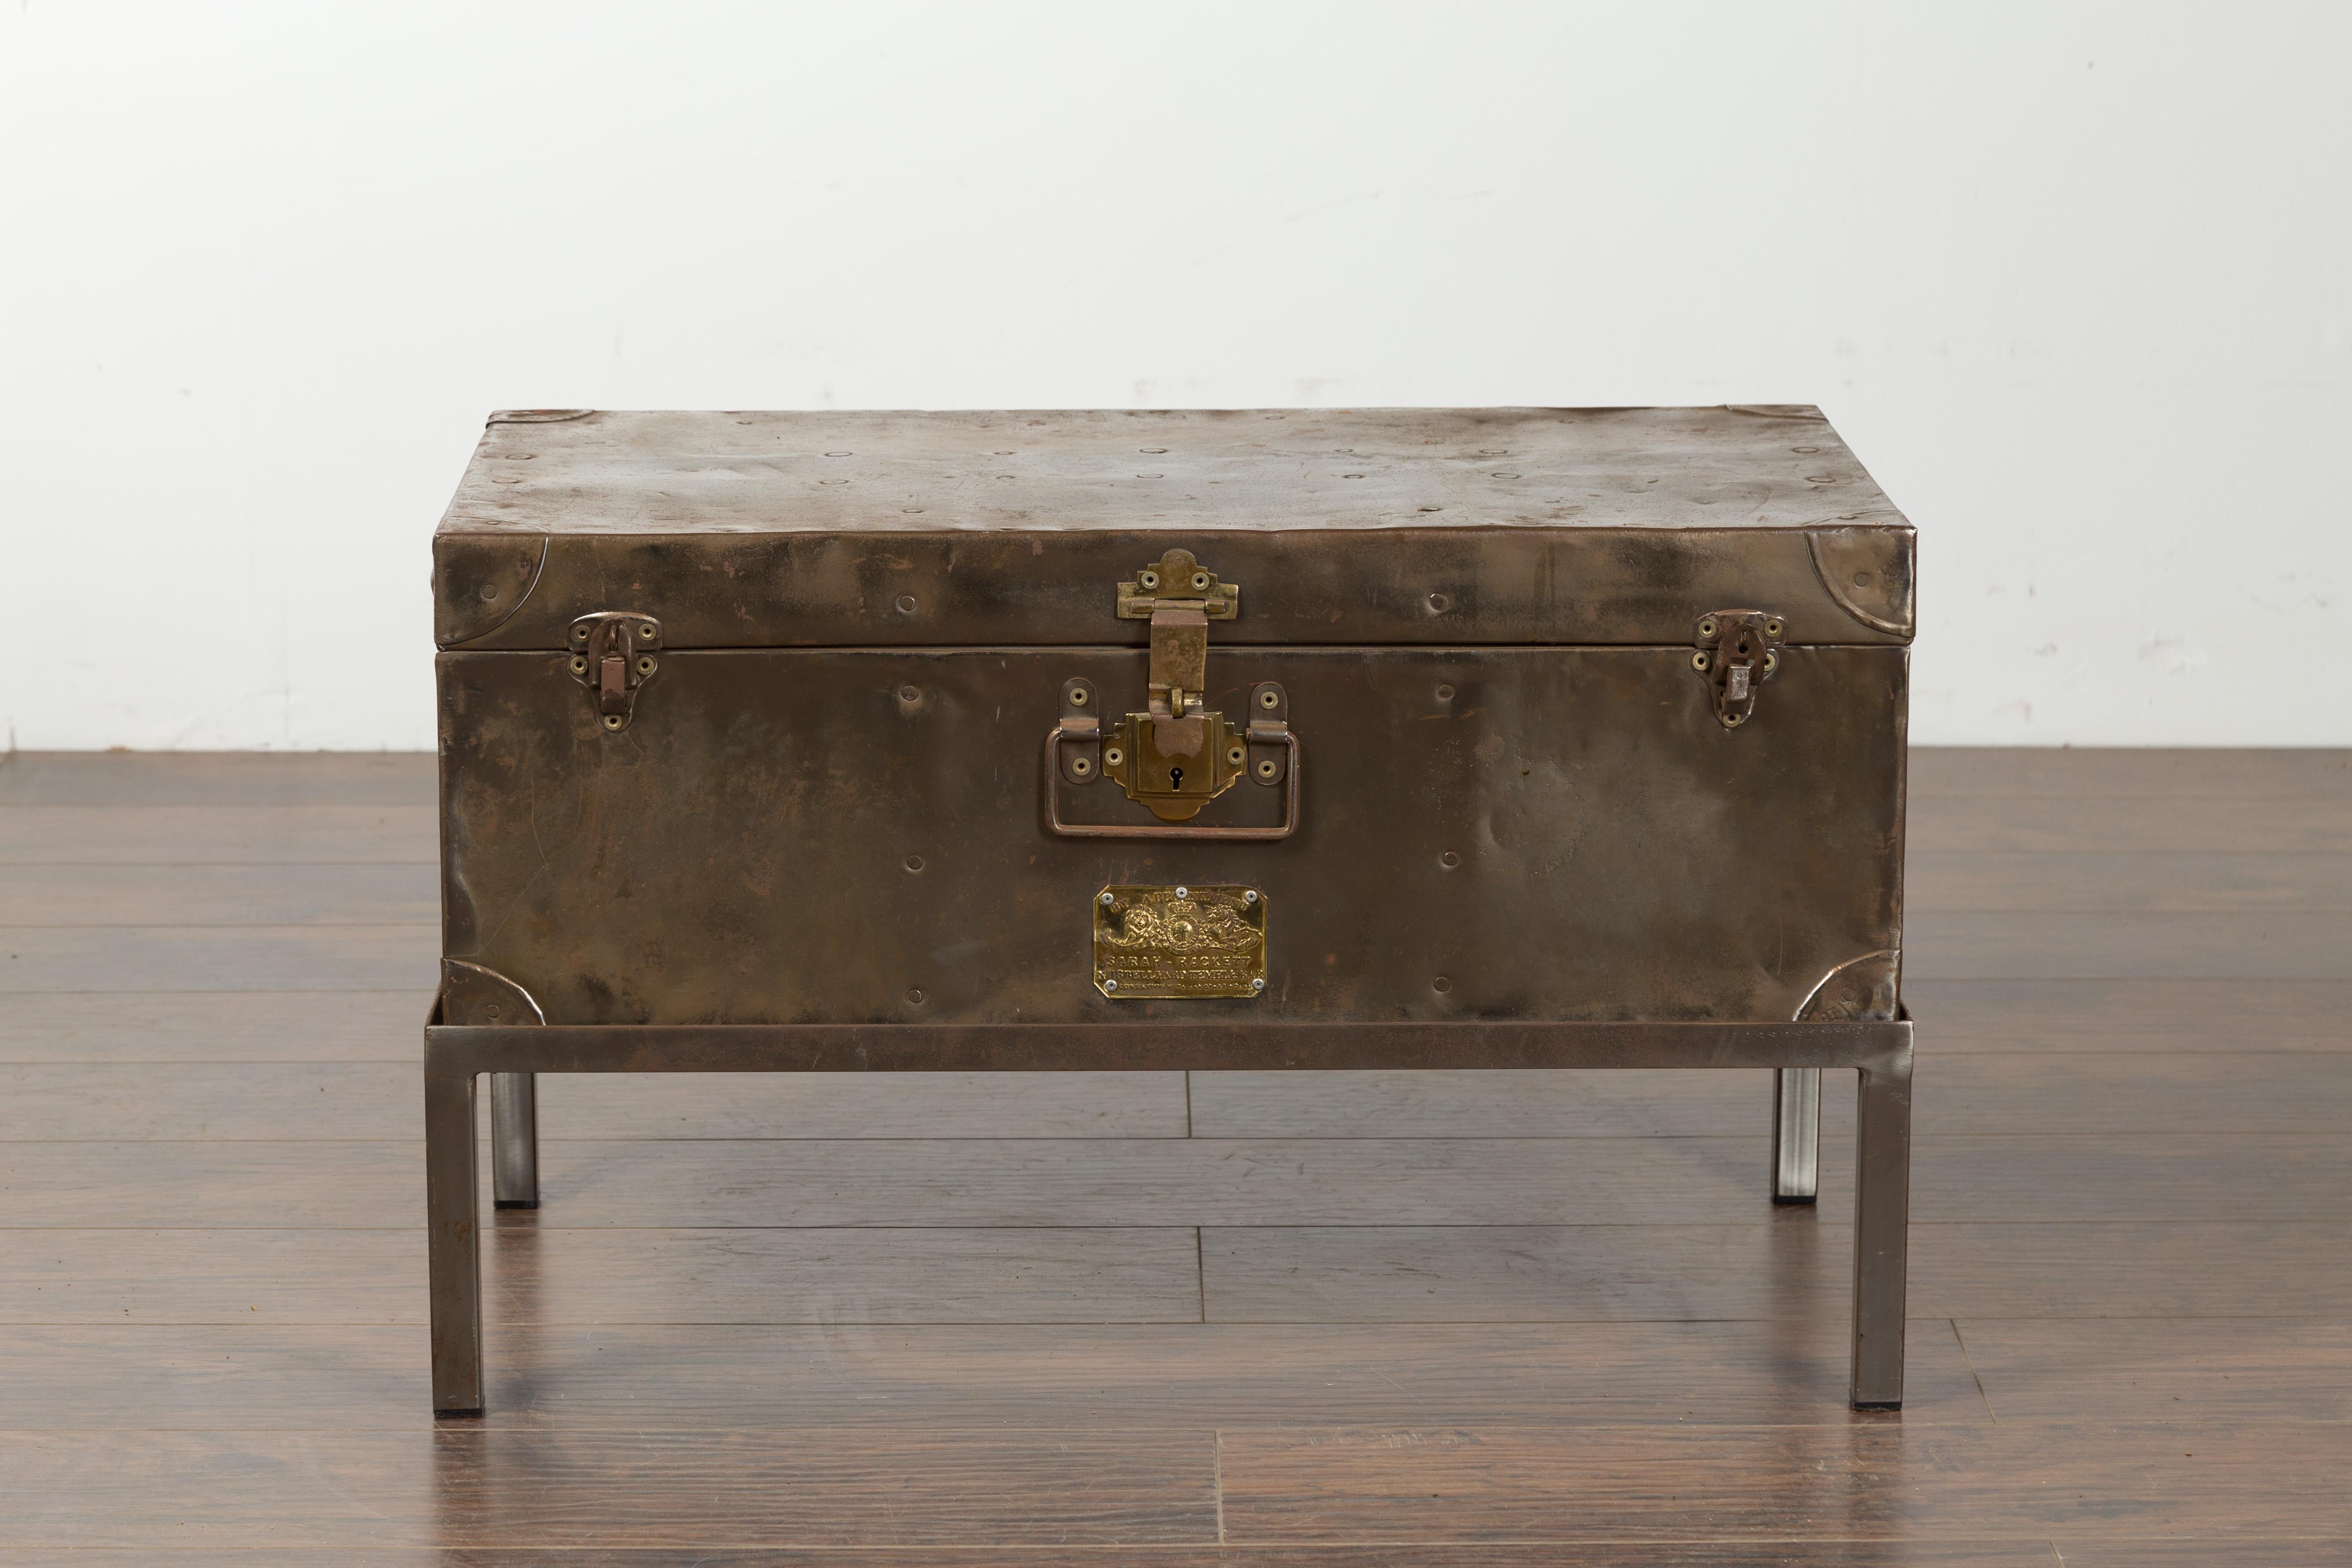 An English metal trunk from the early 20th century, on custom stand. Created in England during the first quarter of the 20th century, this metal trunk is accented with brass hardware. Marked by a brass plaque which says 